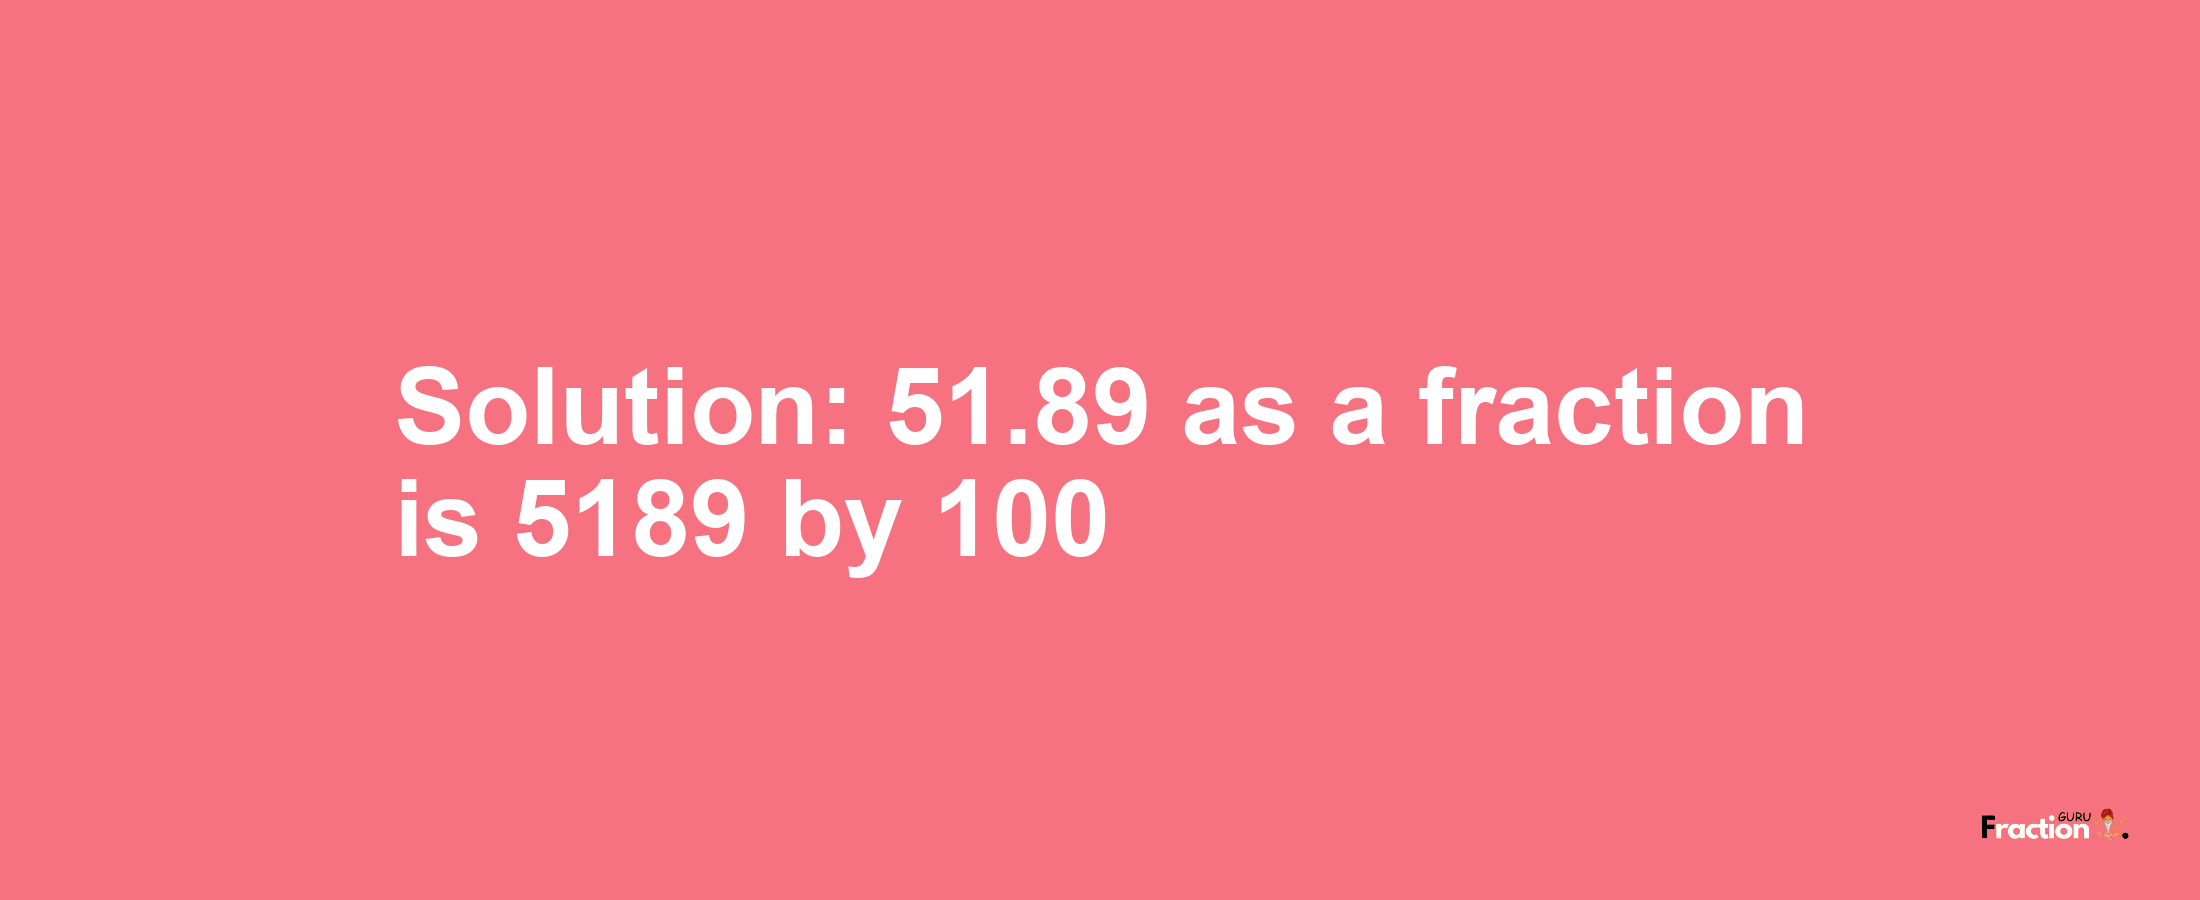 Solution:51.89 as a fraction is 5189/100